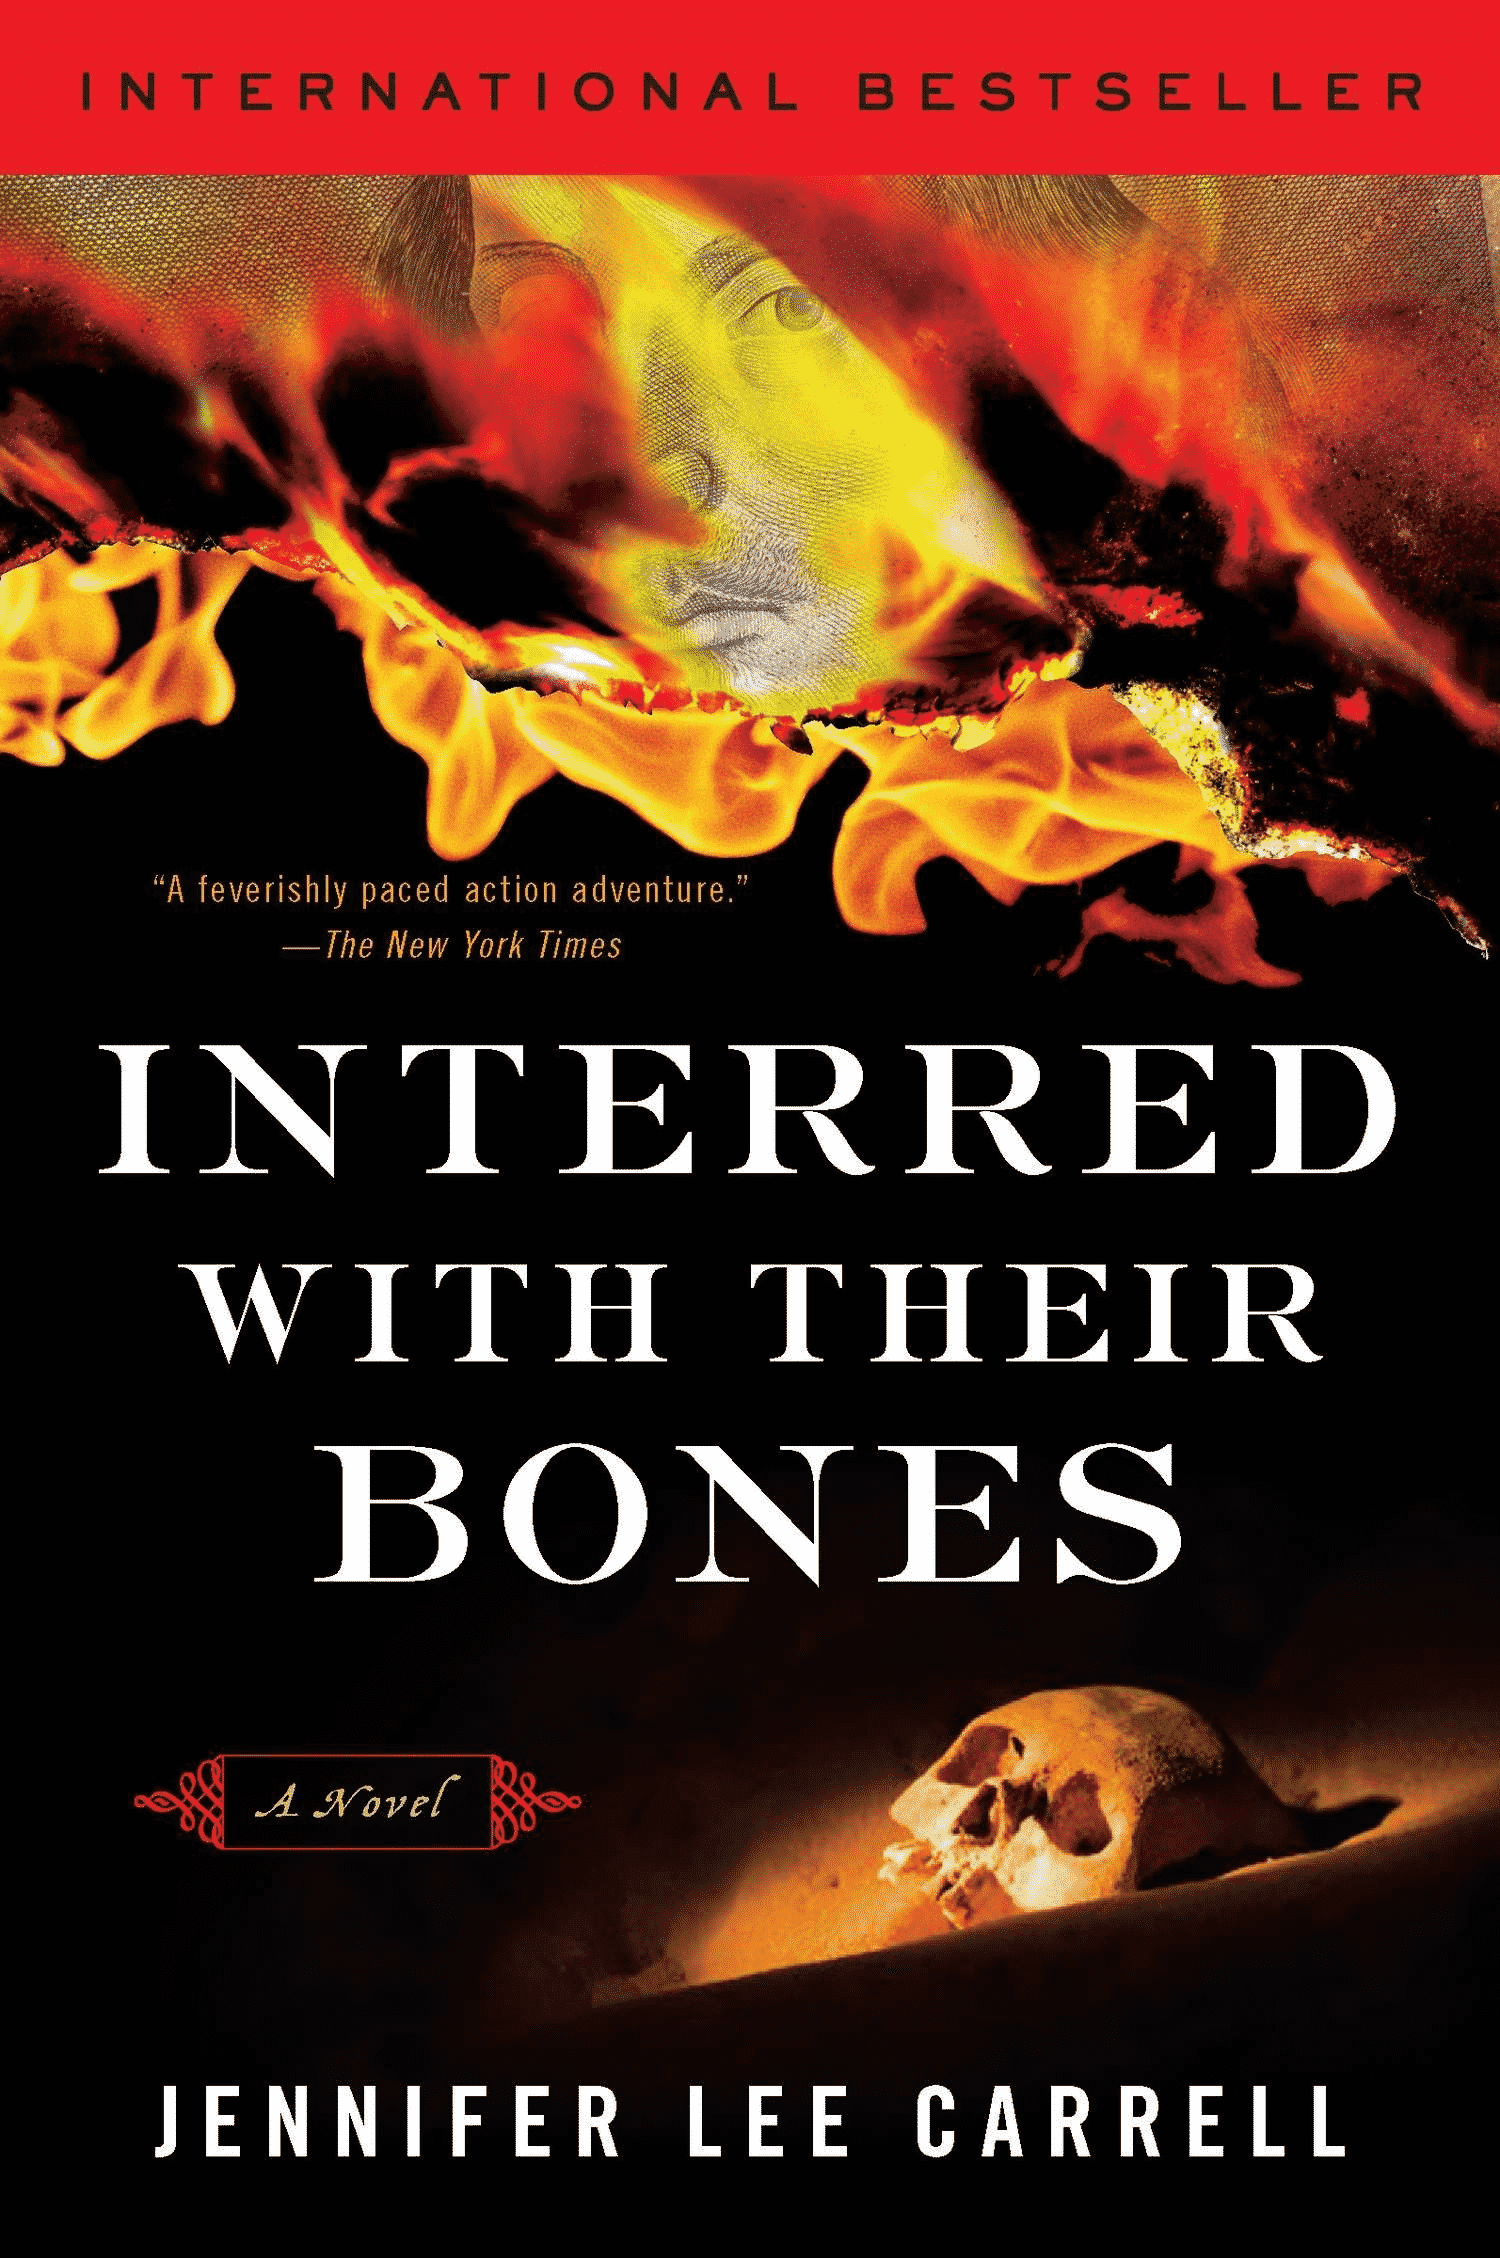 Interred with their bones - first of the Shakespeare books